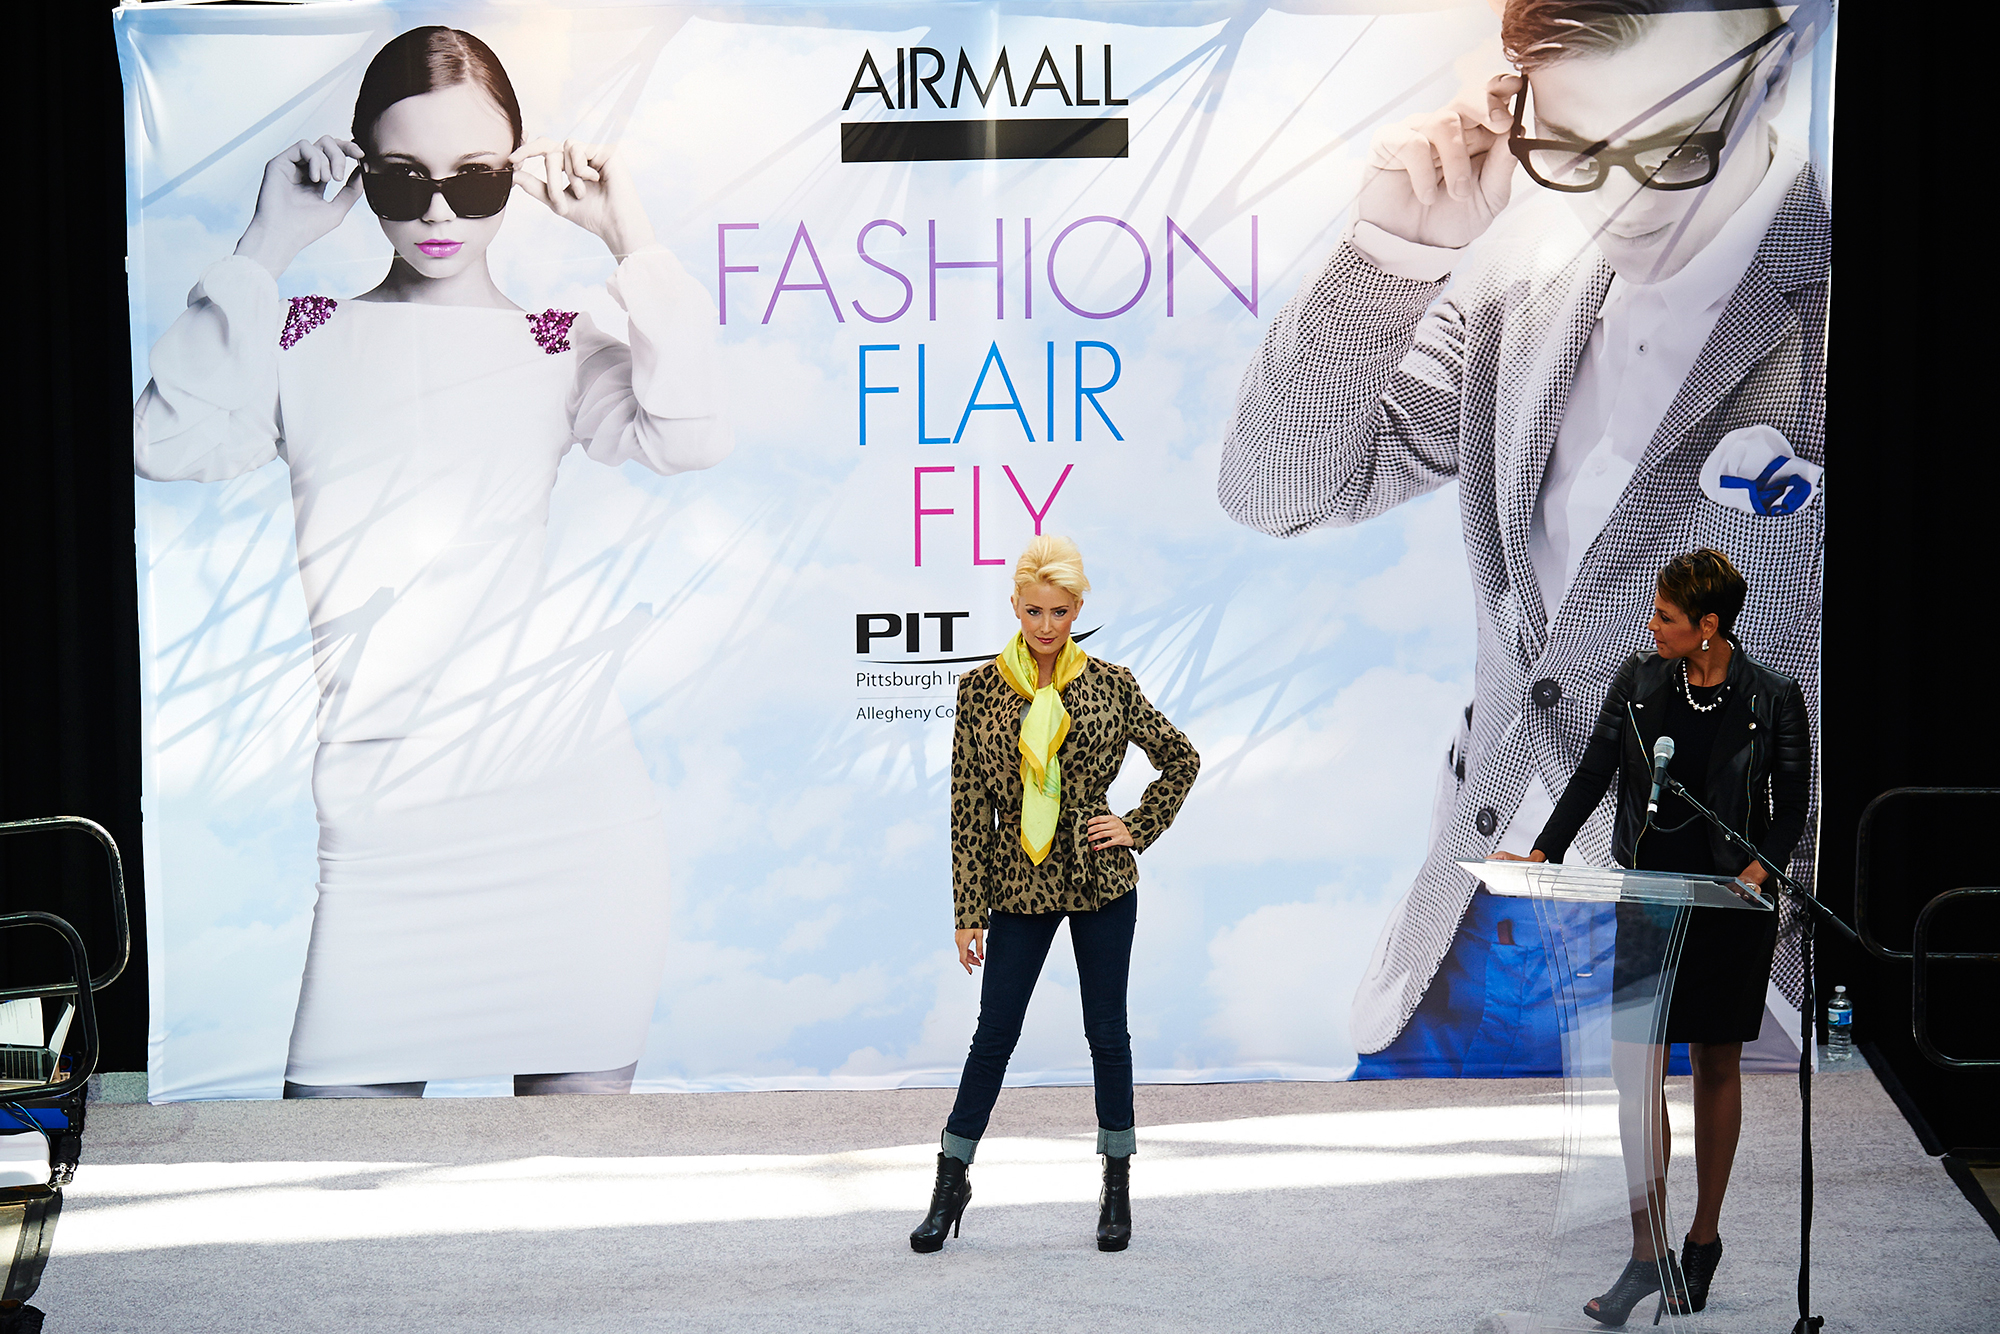 Runway fashion show during FLY2014 event at the AIRMALL at PIT